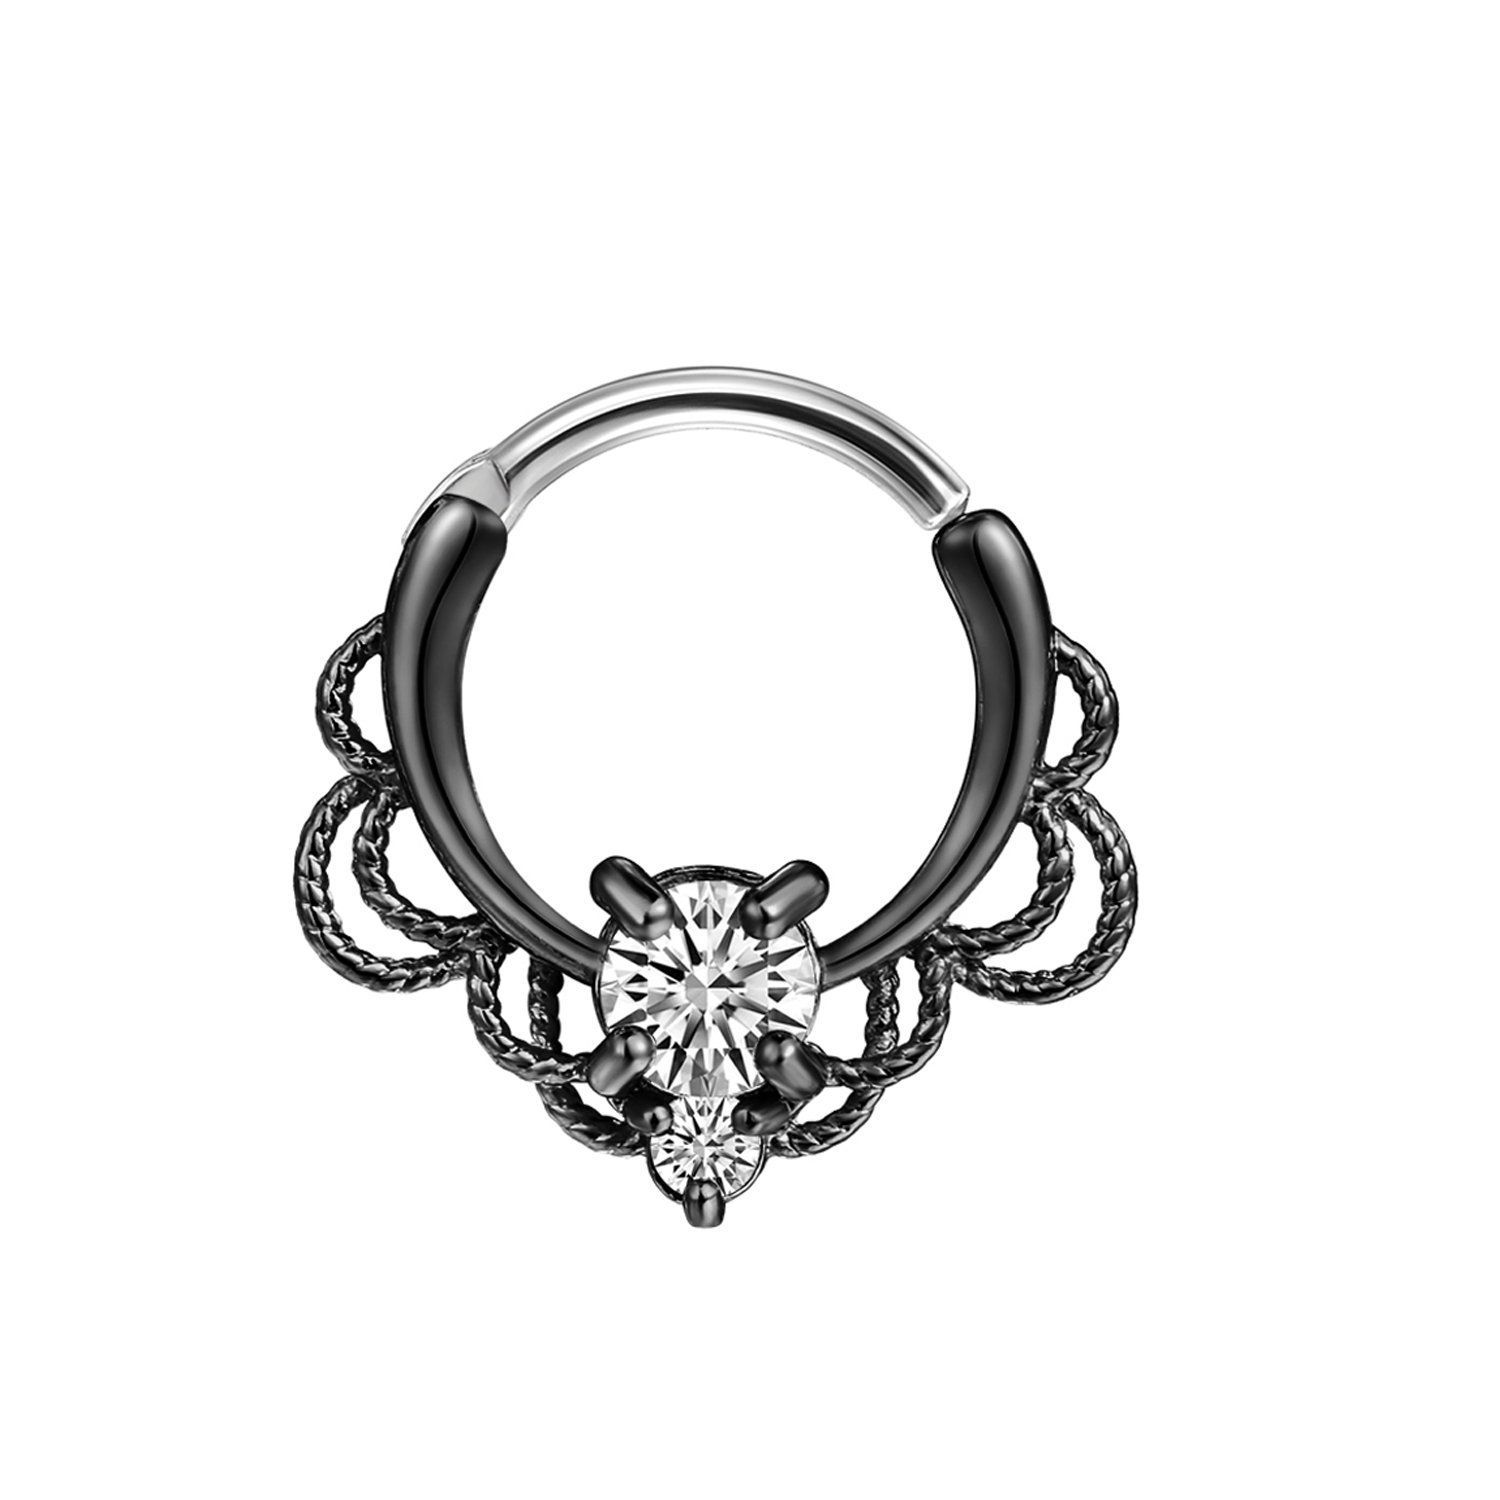 Flongo Nose Hoop Ring, Womens Sparkling Titanium And Cz Piercing Intended For Most Up To Date Sparkling Pattern Rings (View 13 of 25)